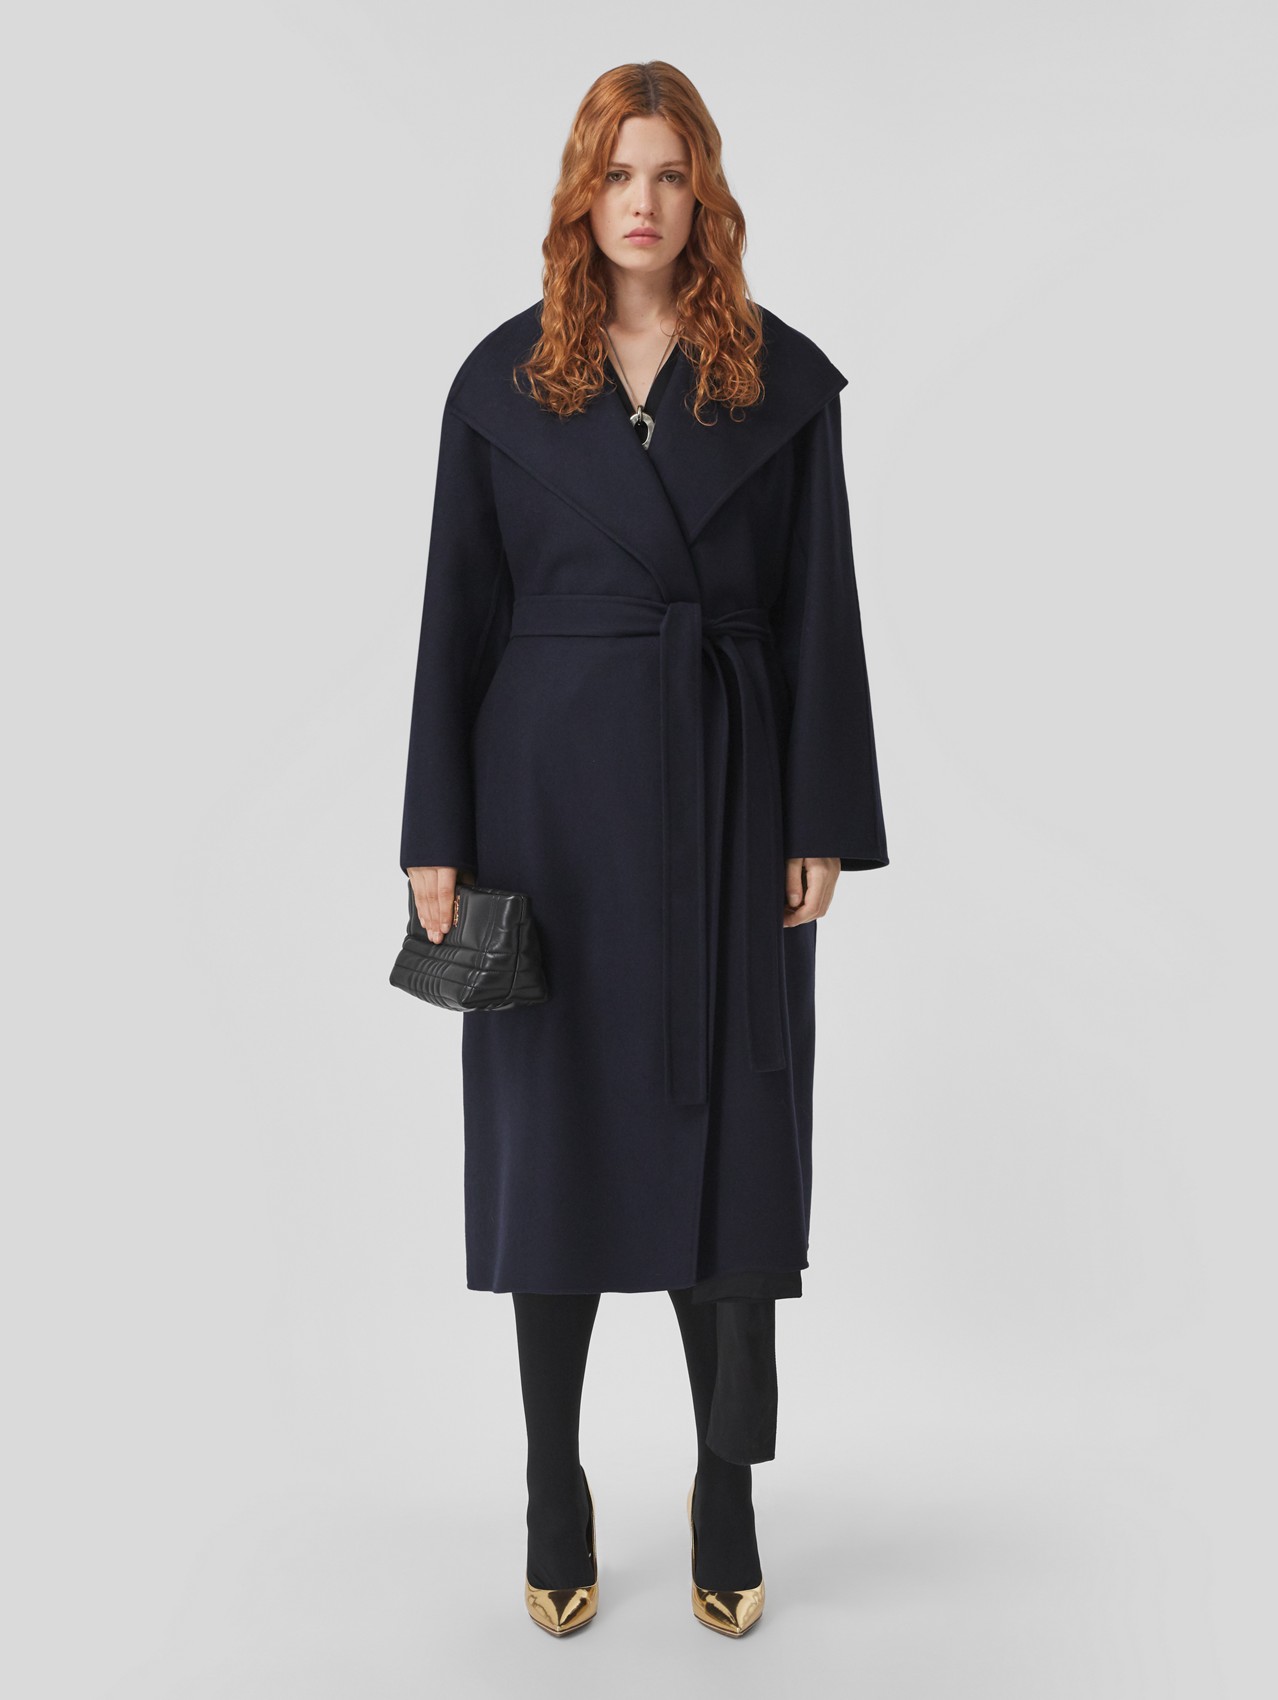 Belted Double-faced Cashmere Wrap Coat in Navy Black